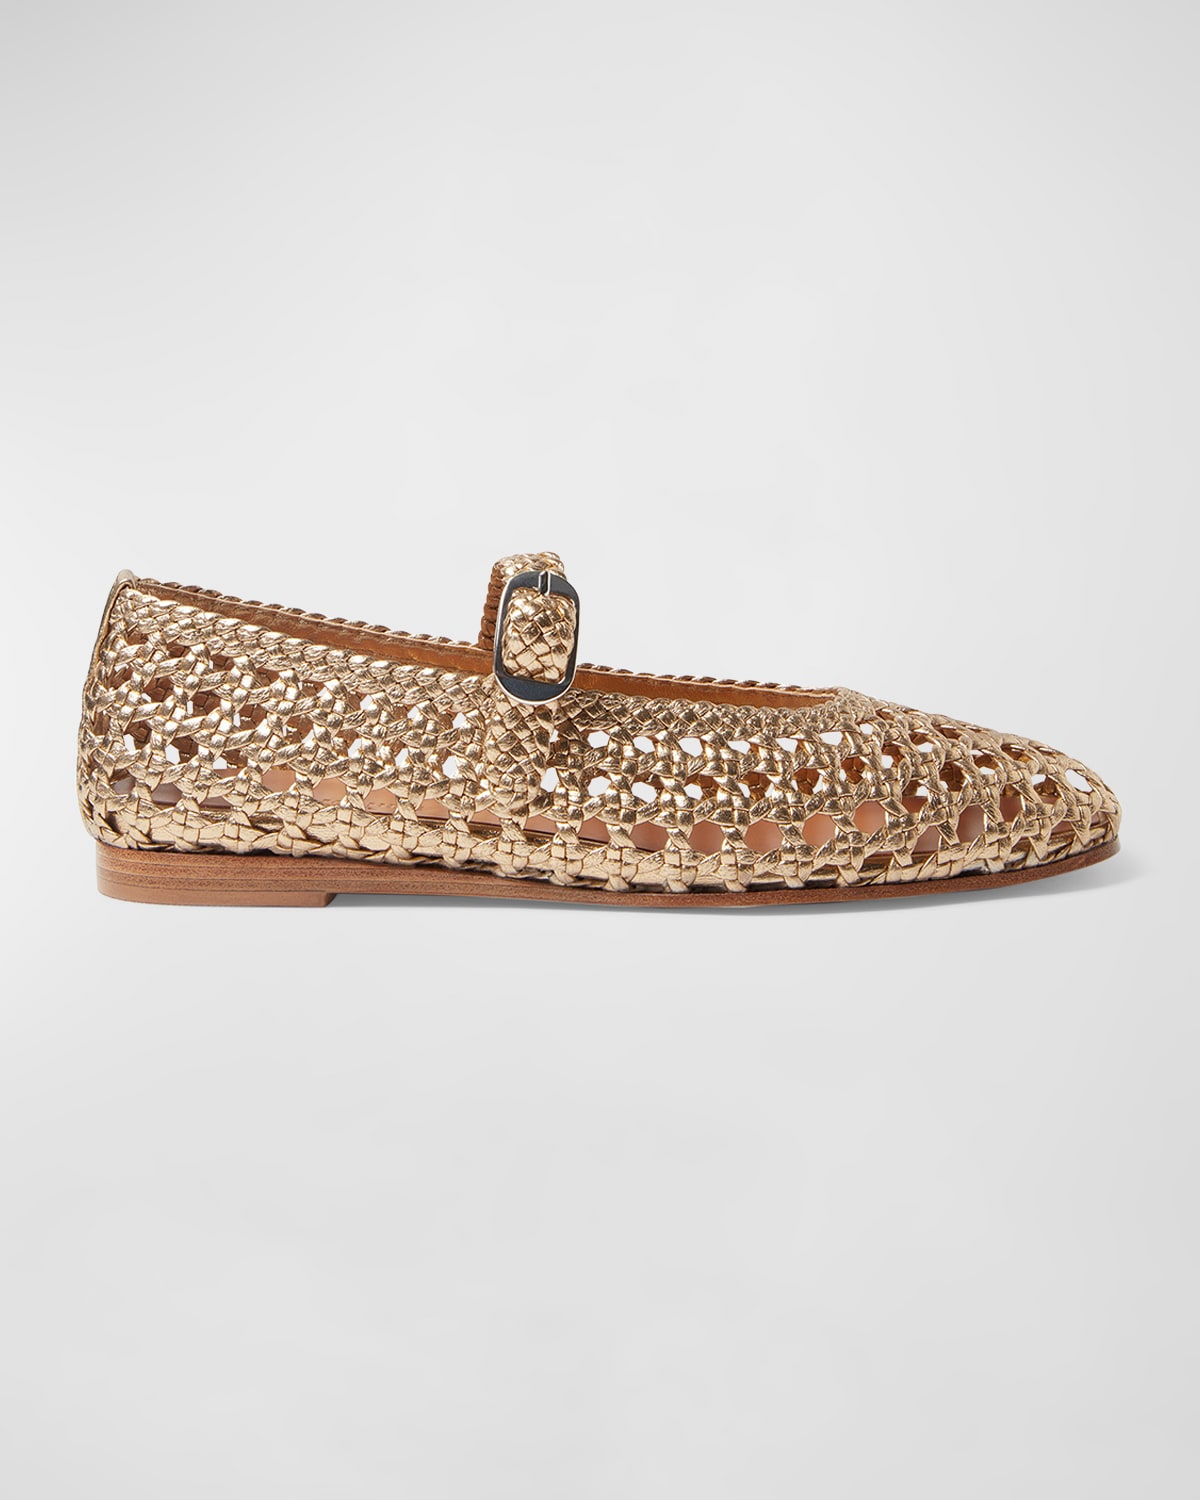 Le Monde Beryl Woven Leather Mary Jane Ballerina Flats In Gold